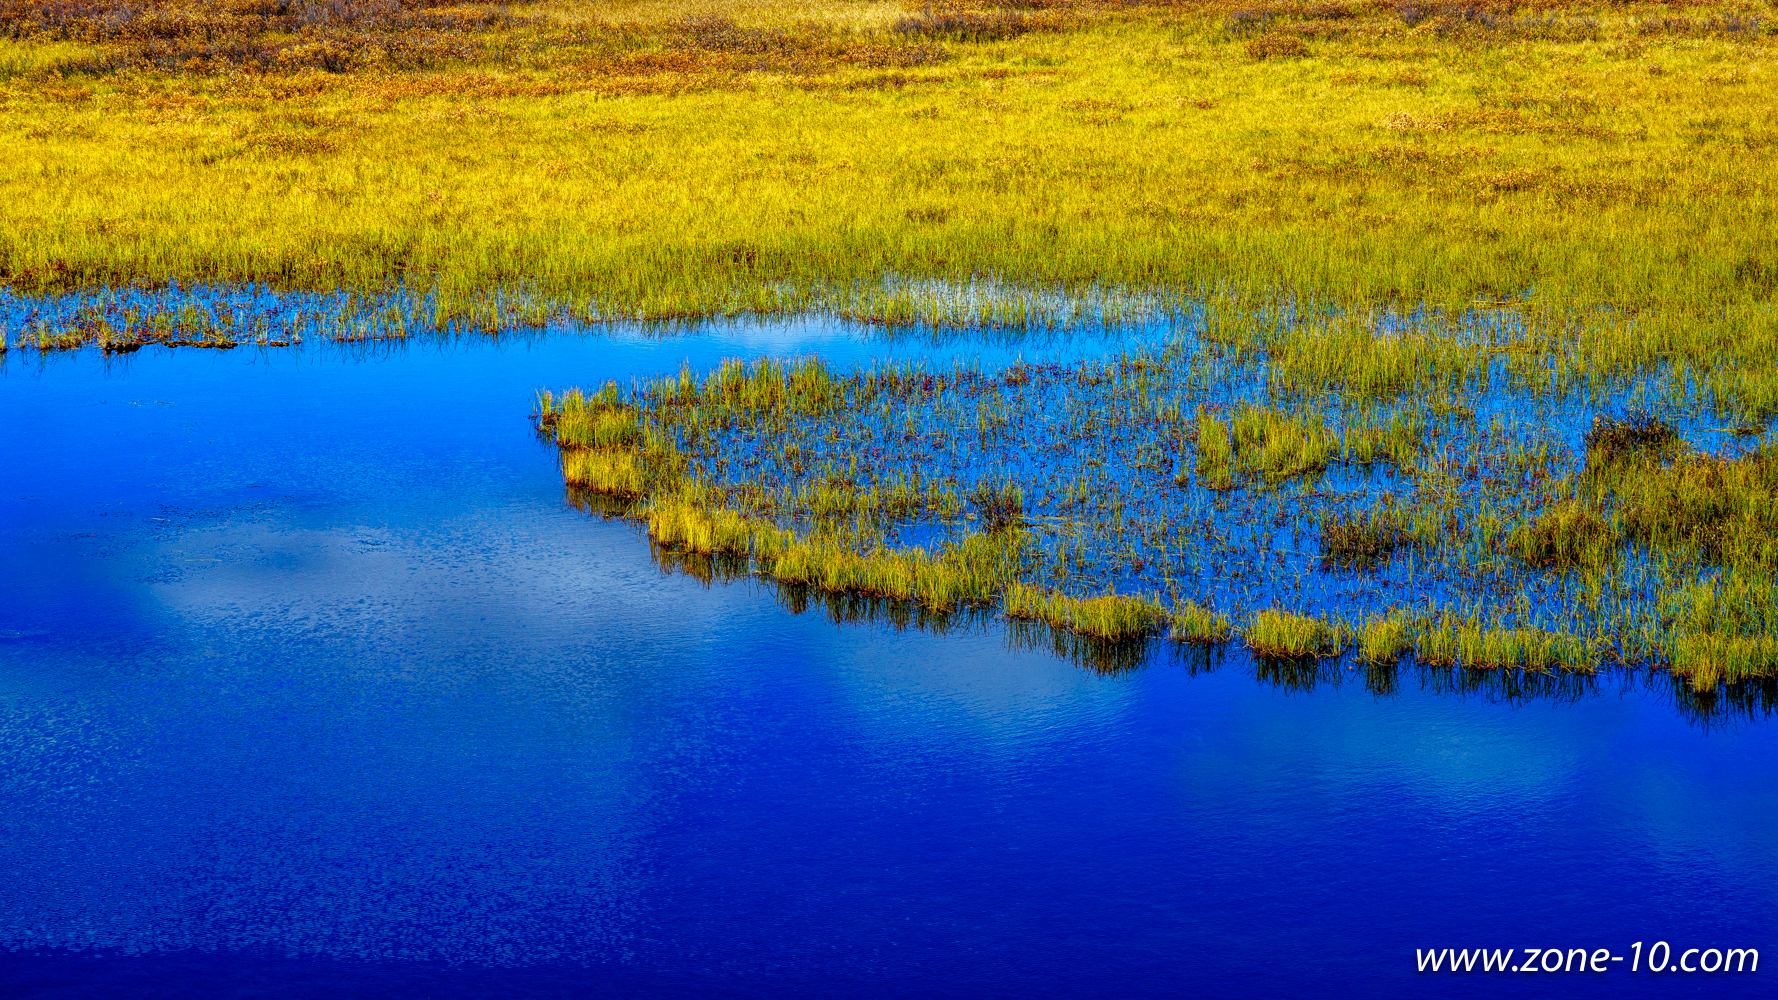 Pond in the Tundra